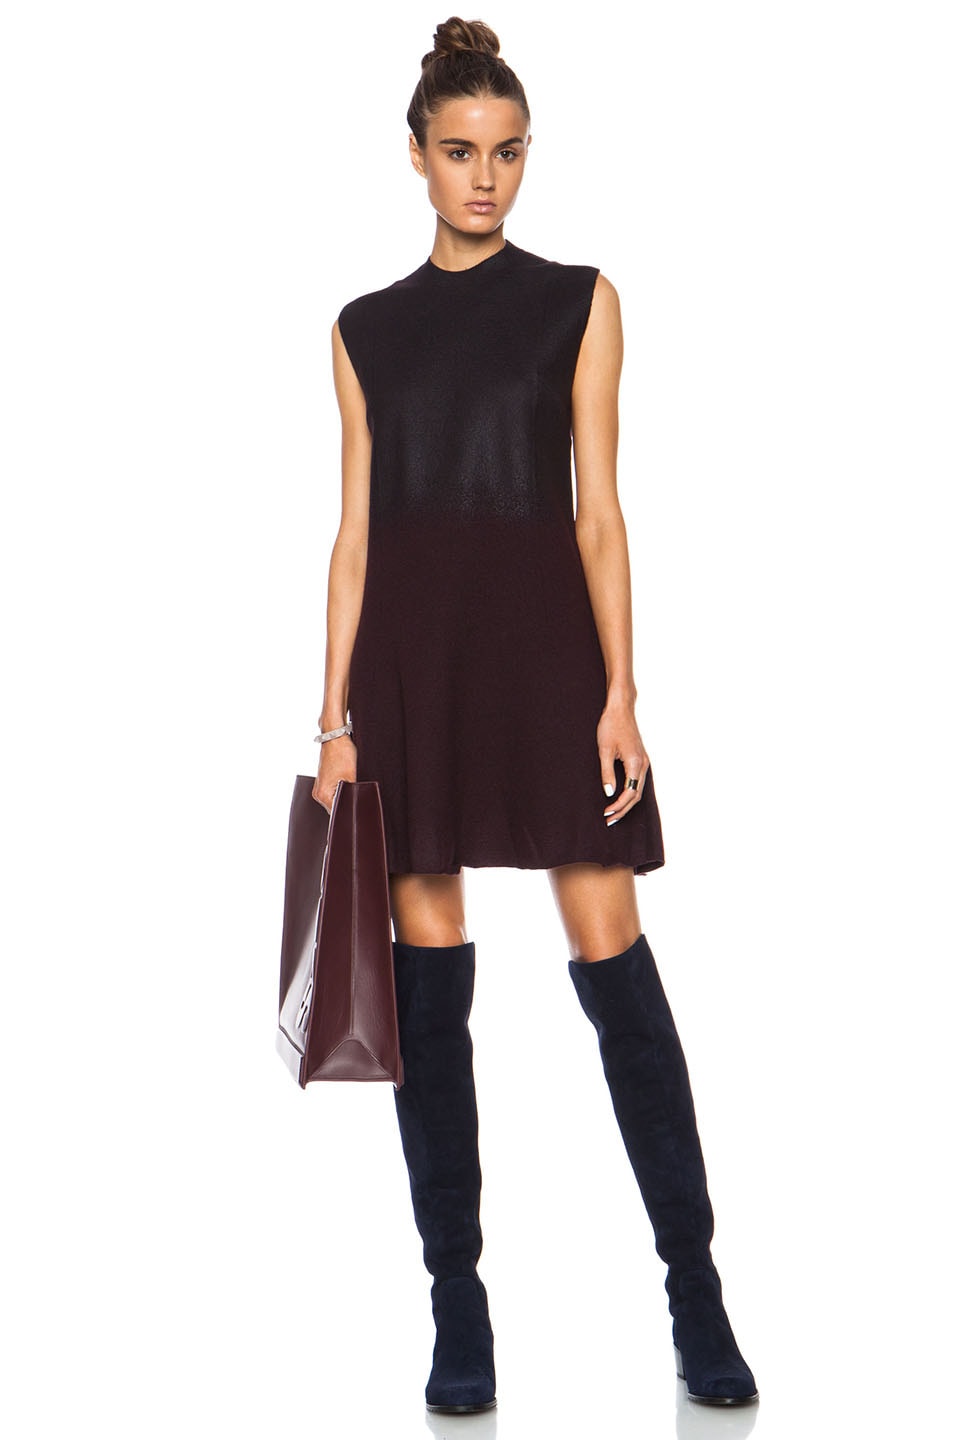 Image 1 of 3.1 phillip lim Felted Wool Dress with Fading Foil Print in Mulberry & Black